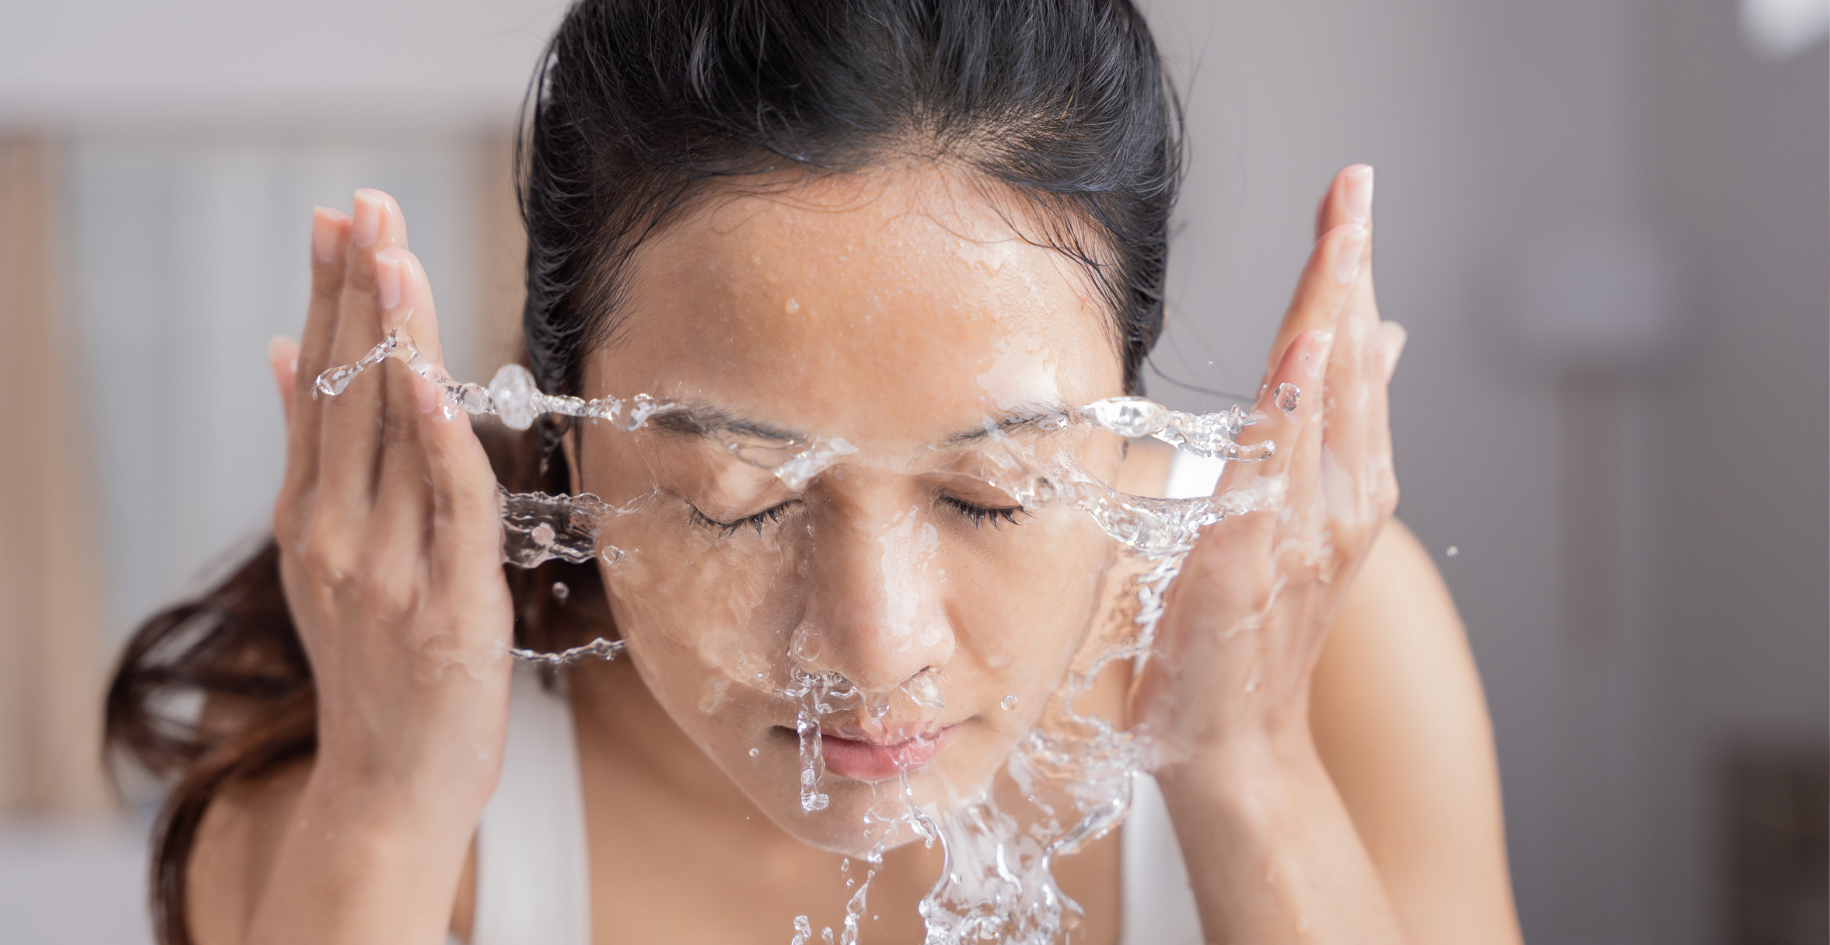 Is Overwashing Your Face Bad?